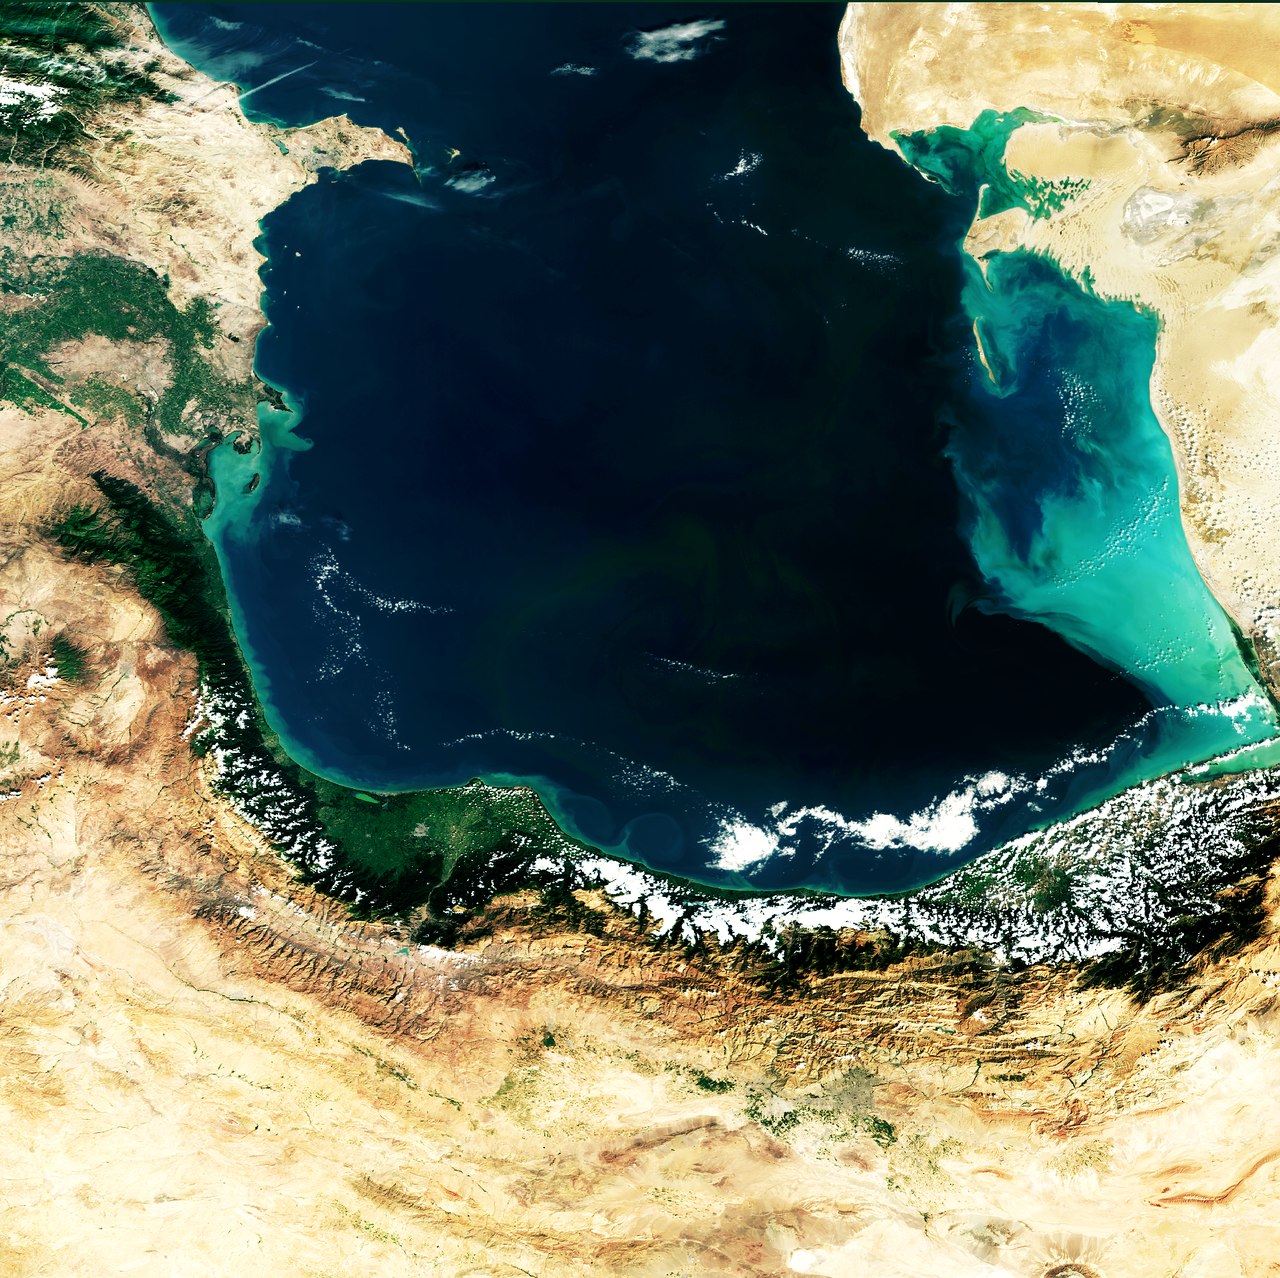 A view of the southern end of the Caspian Sea